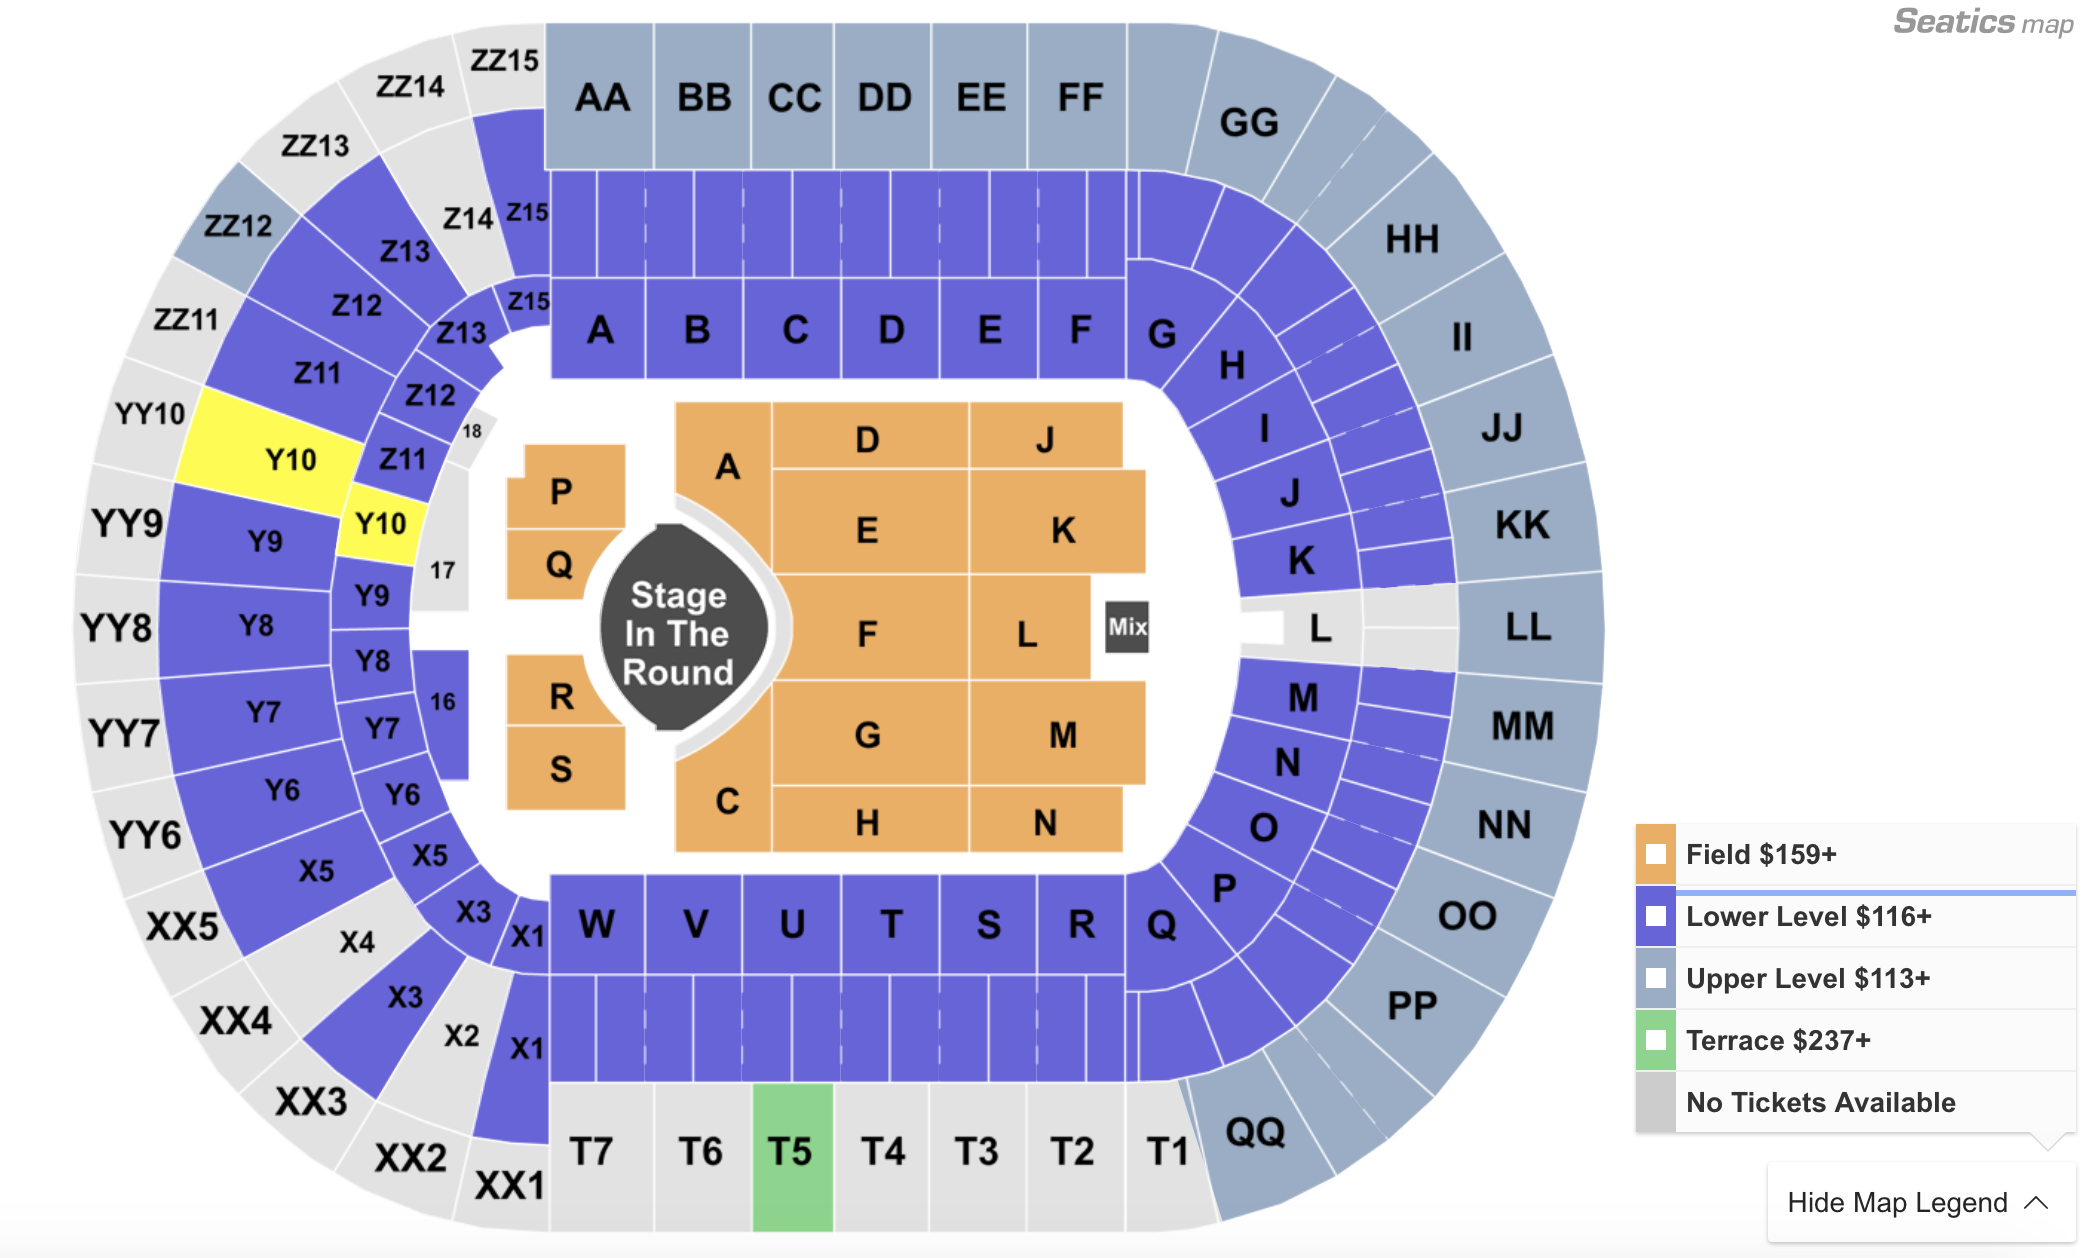 How To Get Cheap Garth Brooks Tickets + Face Value Options & Onsale News